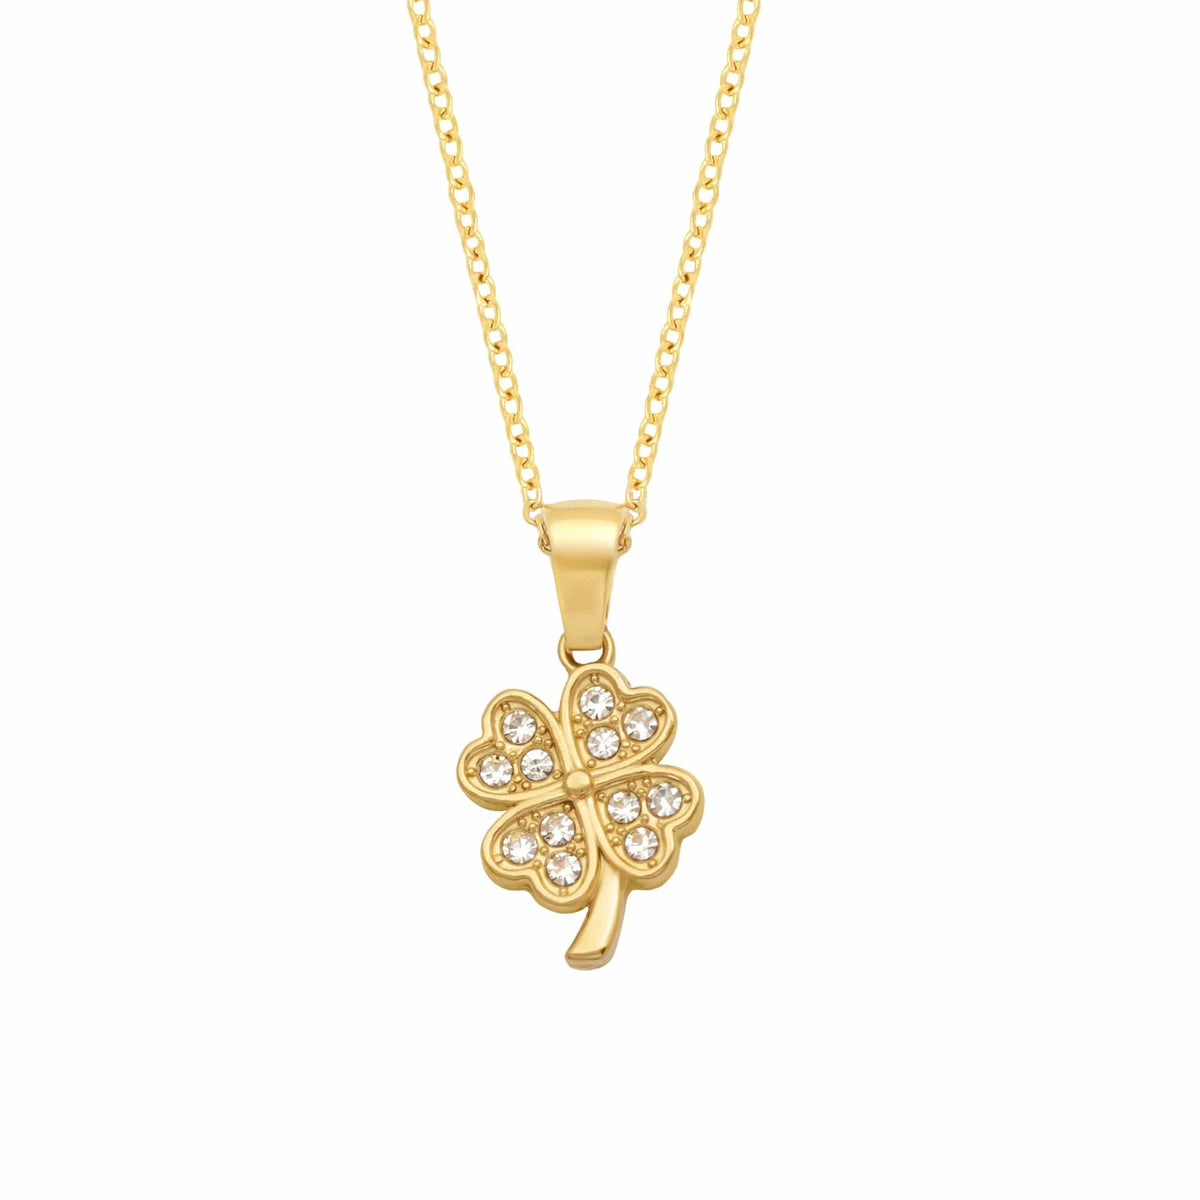 BohoMoon Stainless Steel Clover Necklace Gold